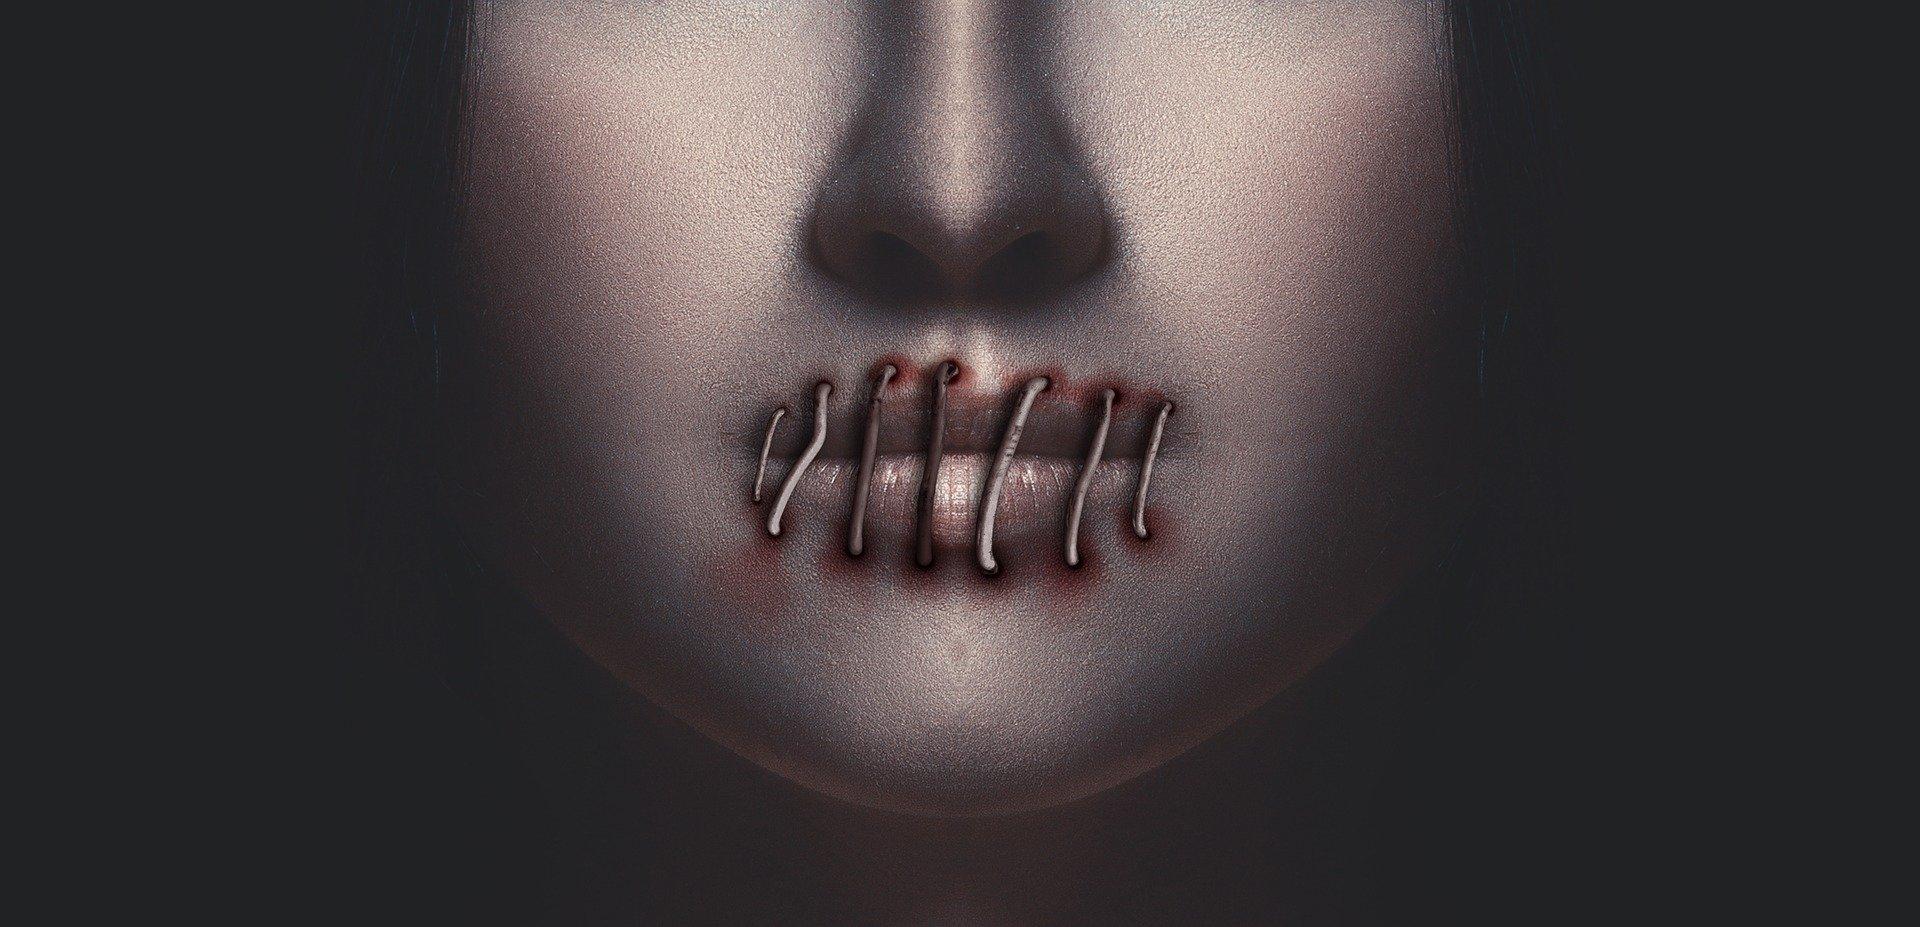 Woman Mouth Lips Silence Face dark horror gothic wallpaper